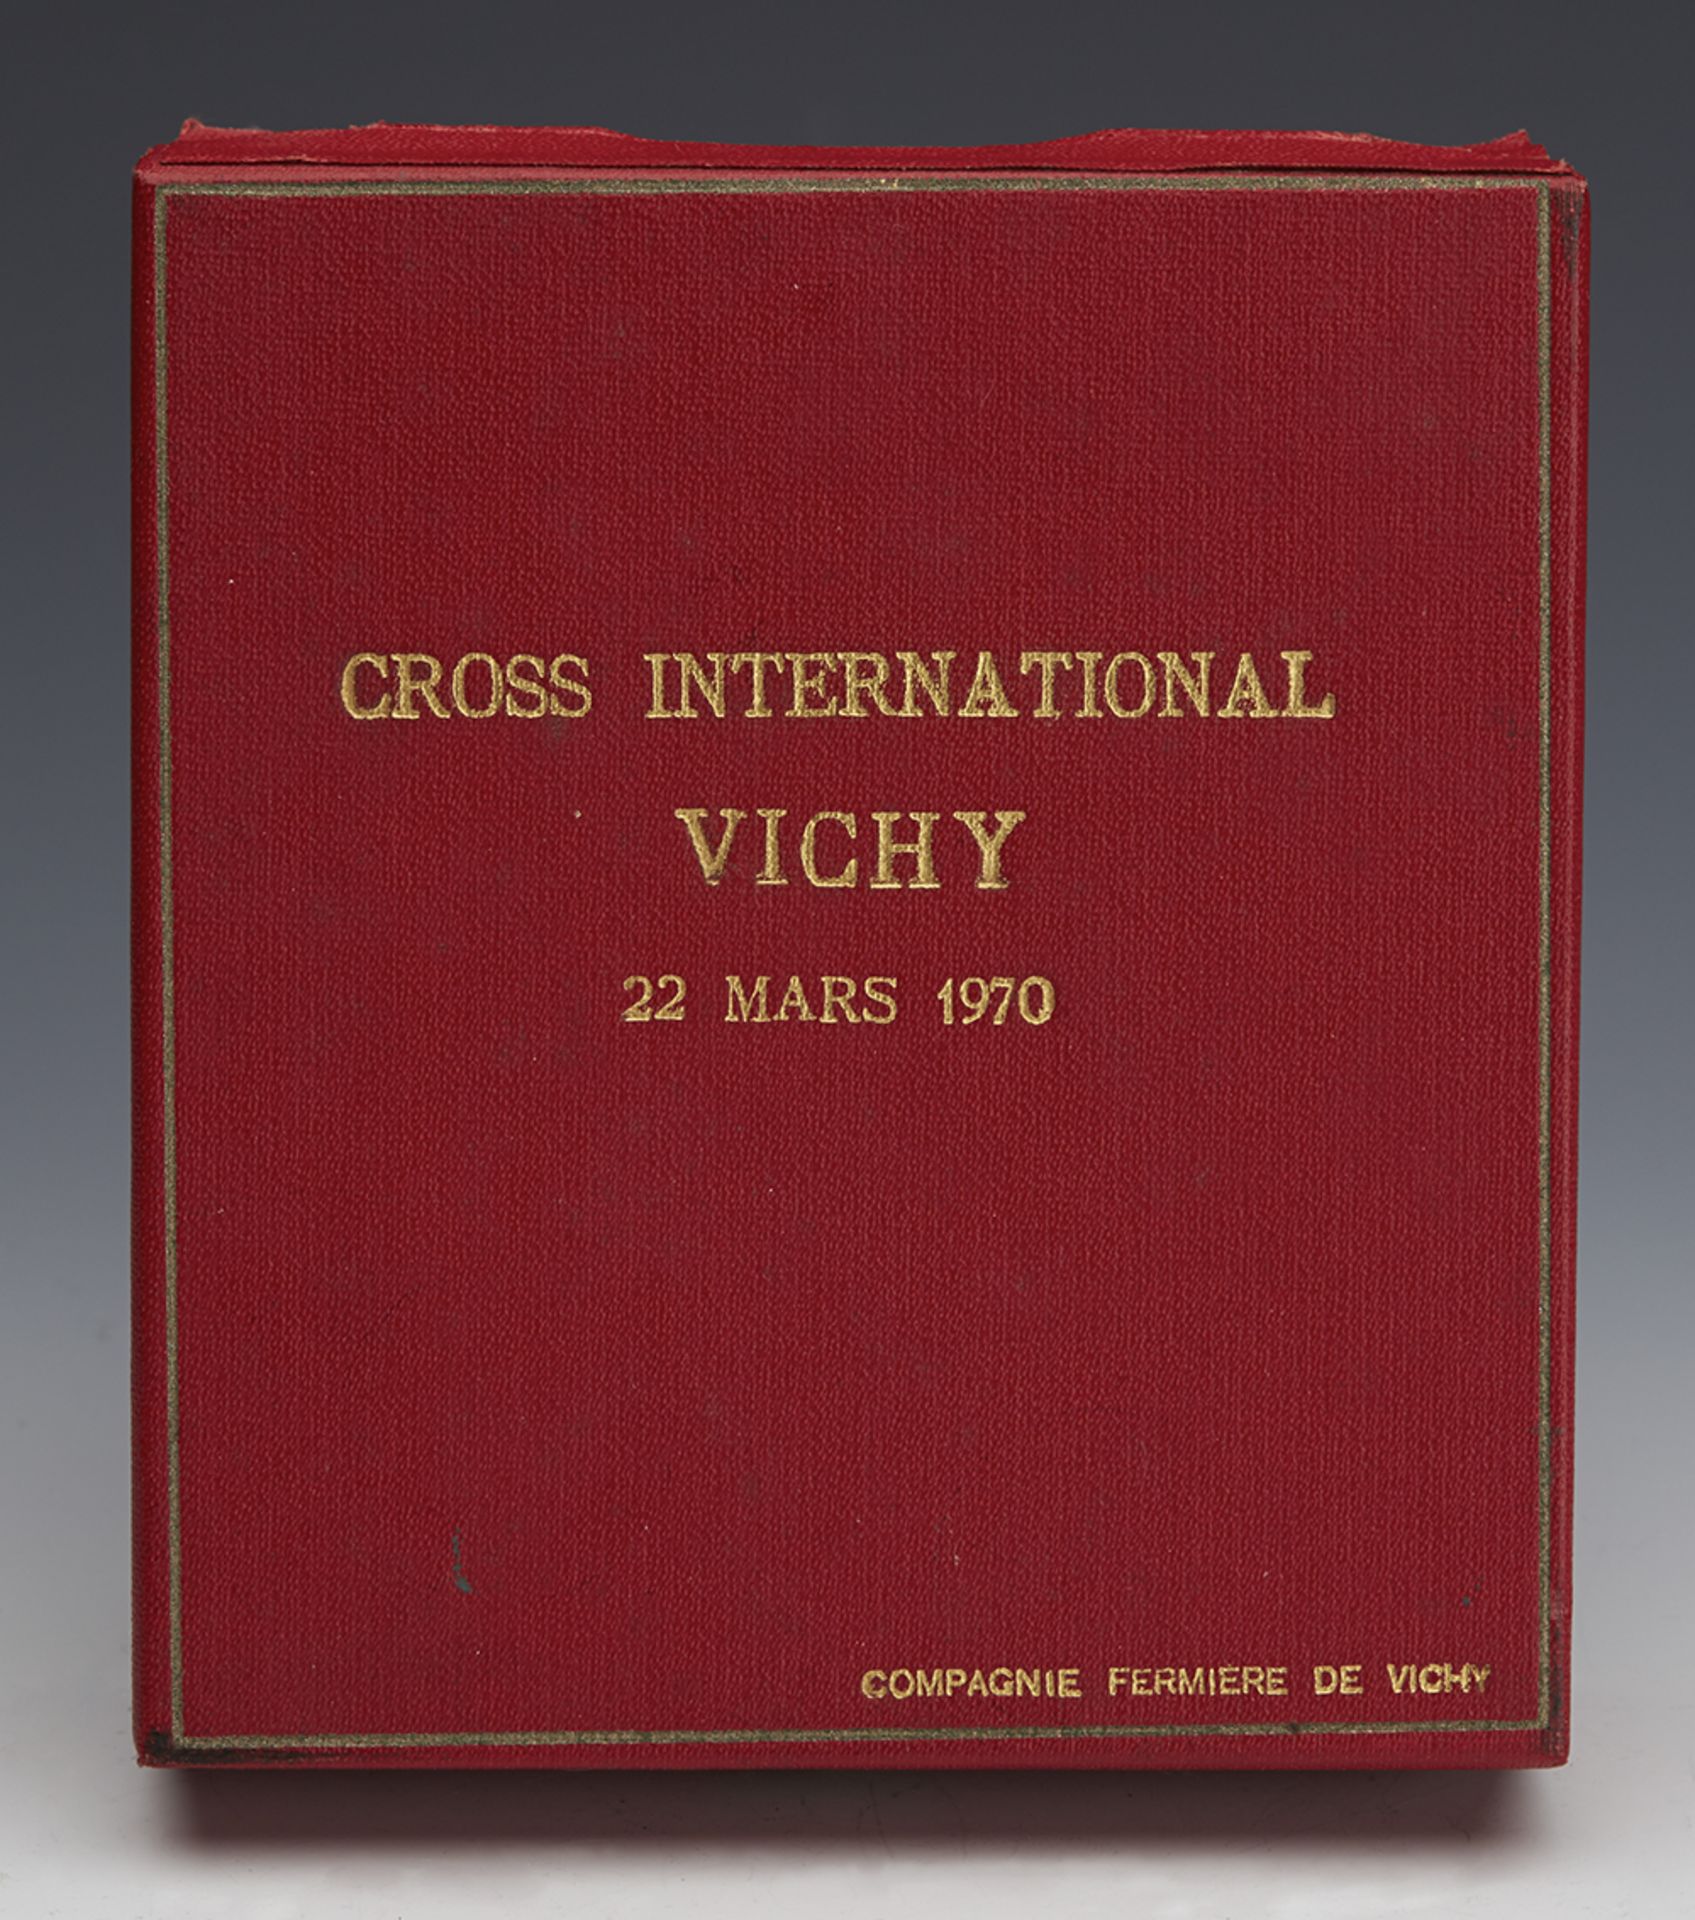 CARTIER CASED TROPHY THE CROSS INTERNATIONAL VICHY 1970 - Image 6 of 6